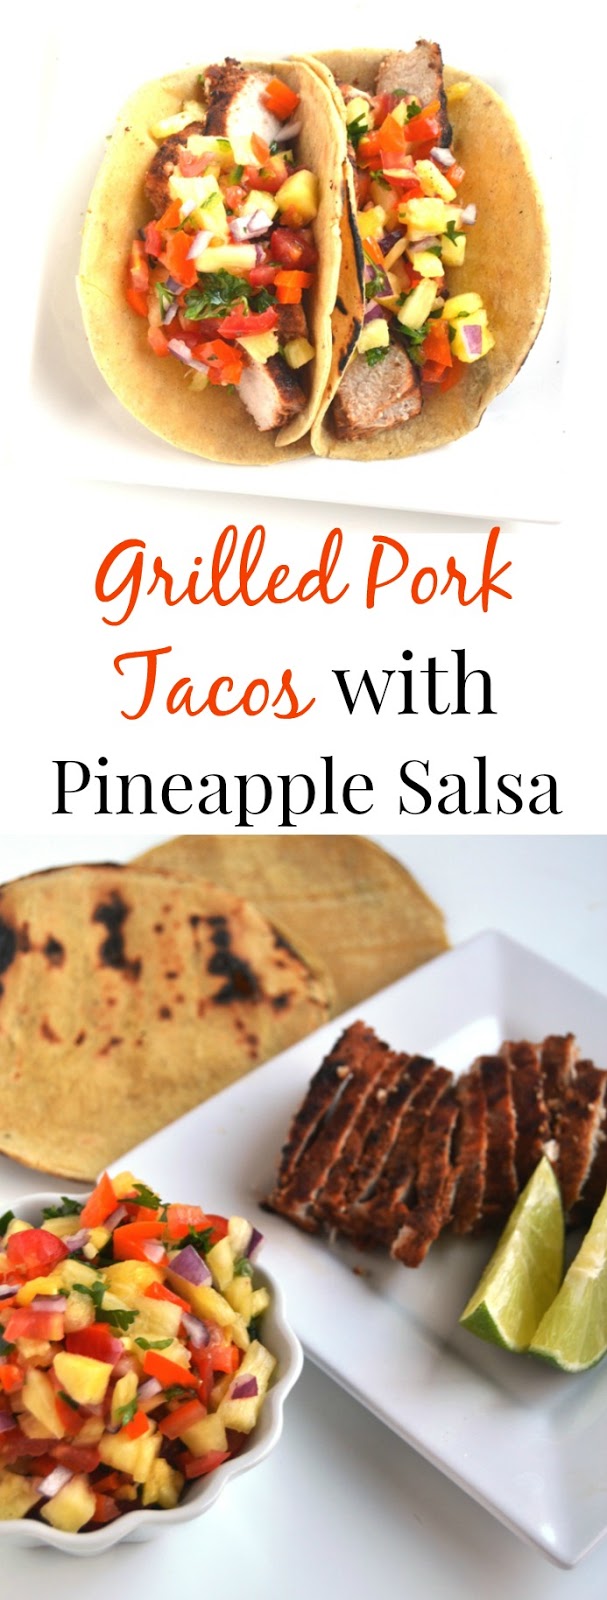 These Grilled Pork Tacos with Pineapple Salsa are perfect for a quick dinner and full of fresh flavors! www.nutritionistreviews.com